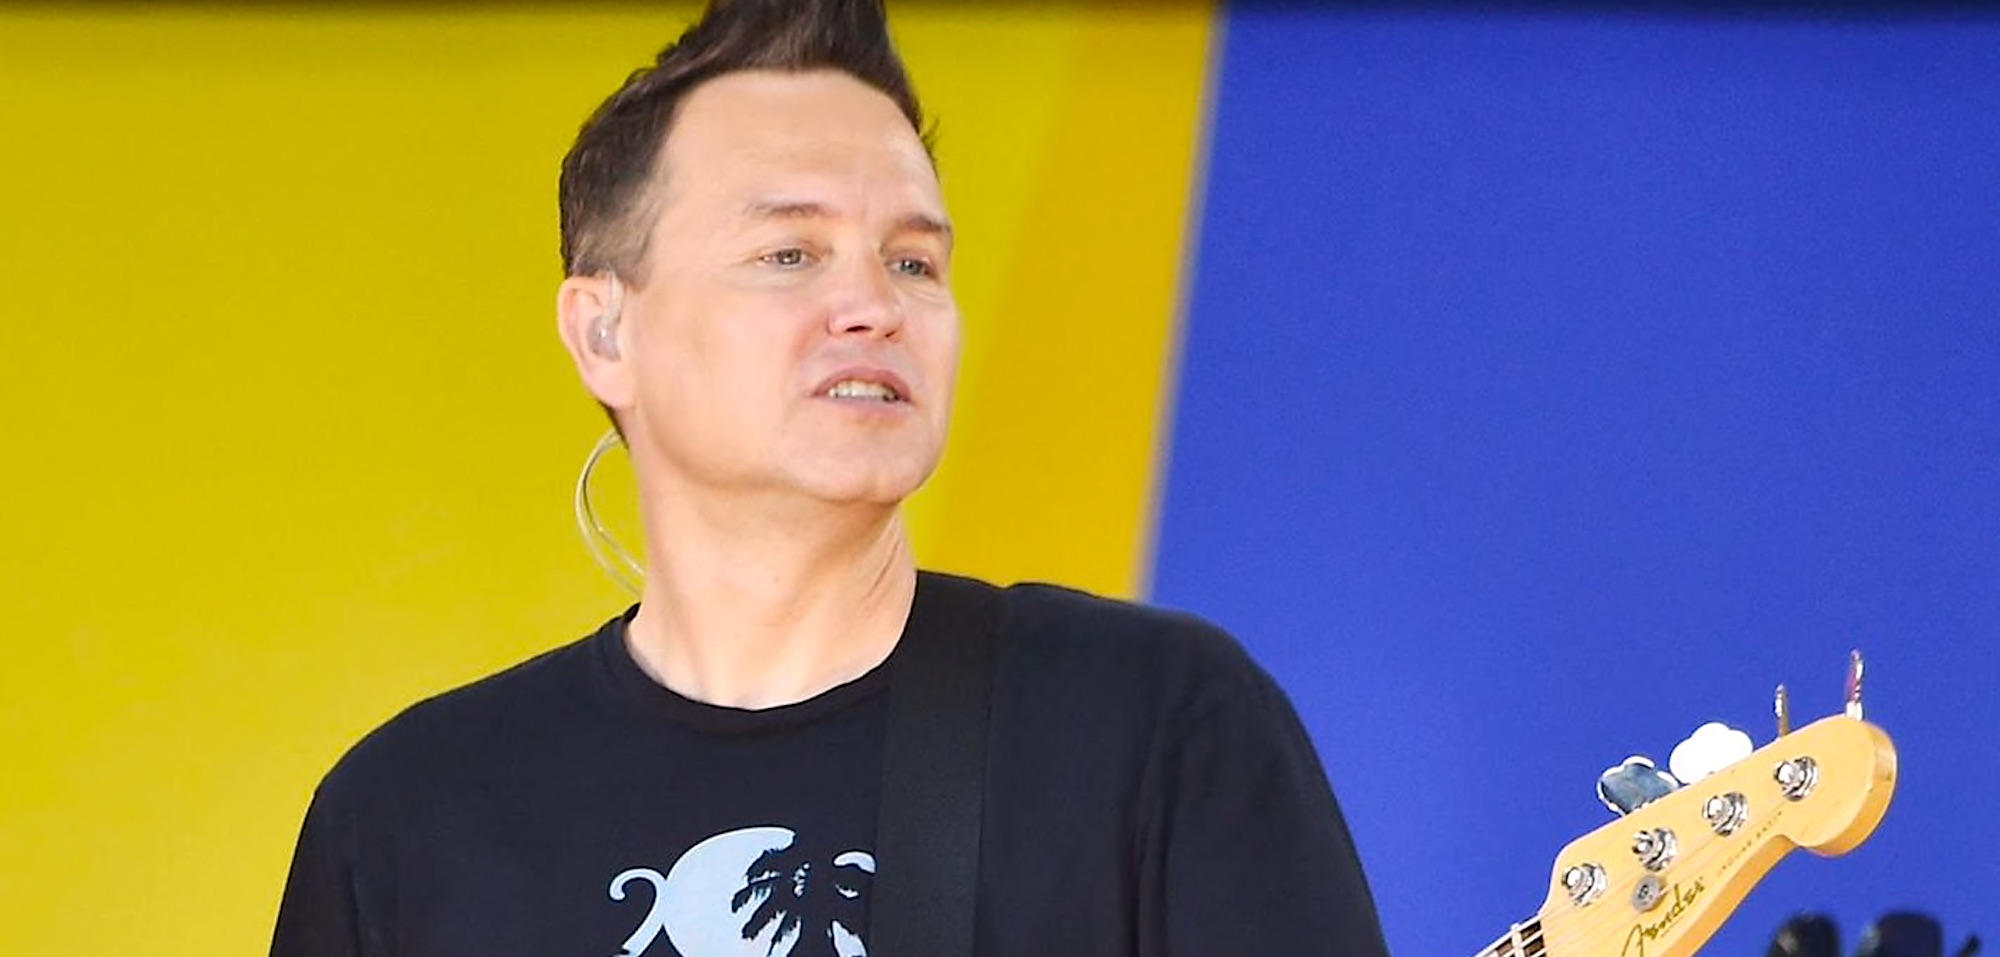 Blink-182 Frontman Mark Hoppus Gives Update on Cancer Diagnosis, “I Feel Much Better Than Yesterday”